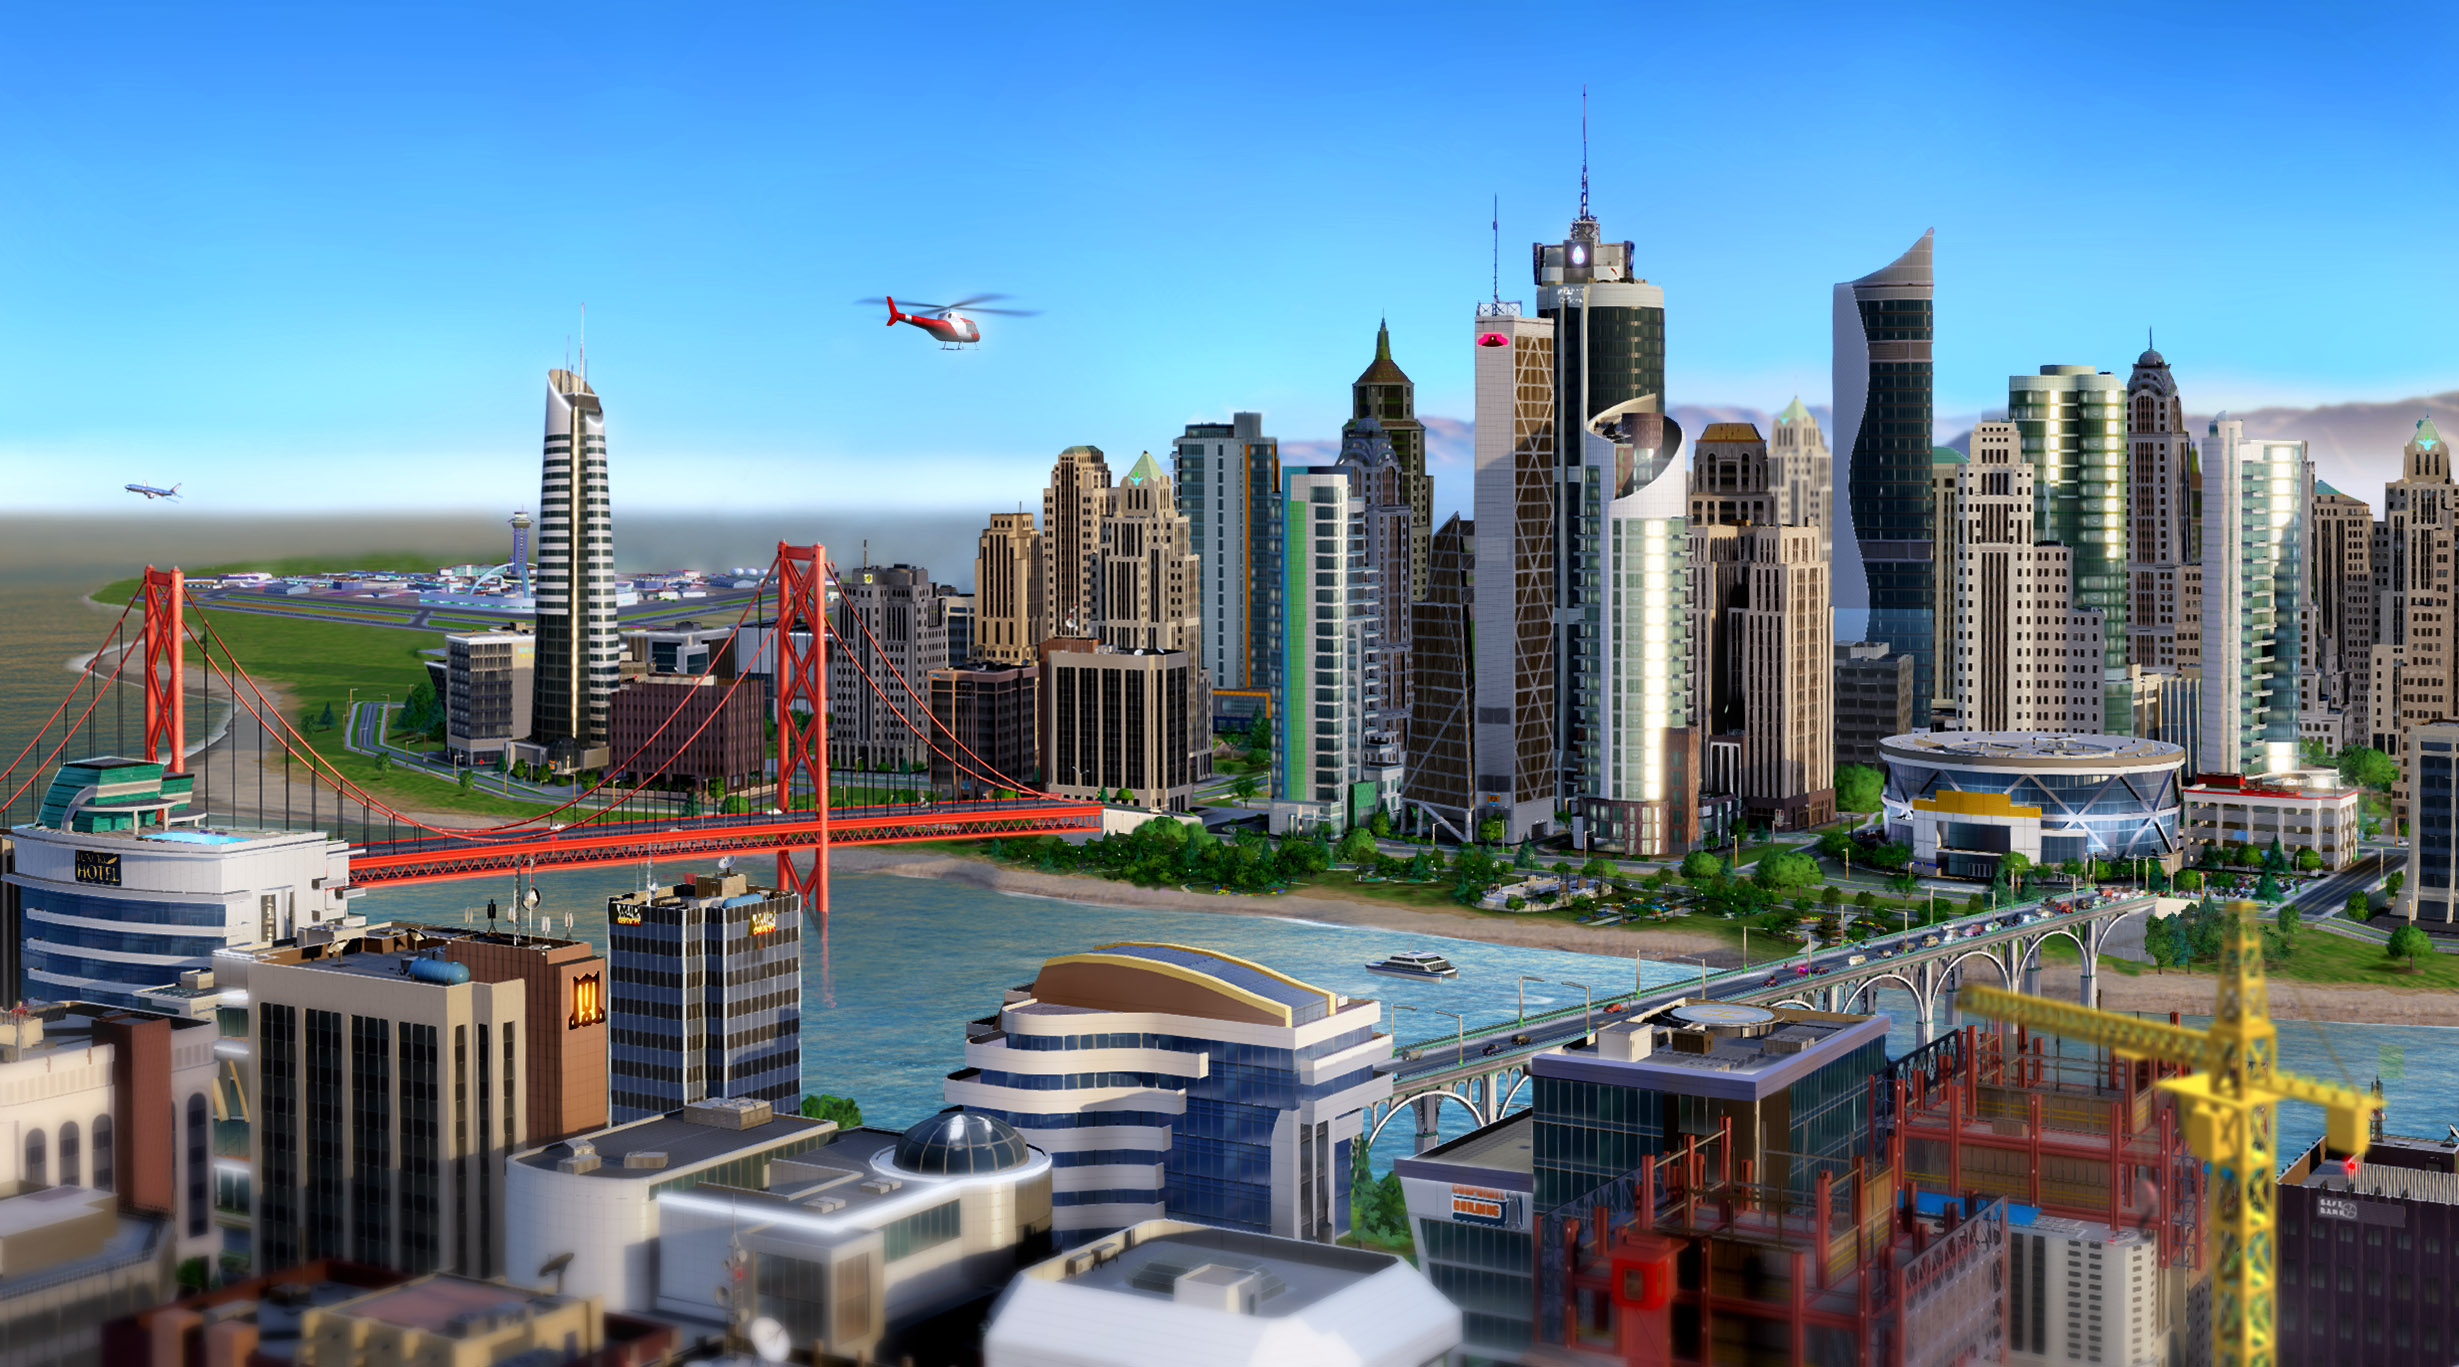 Simcity on Sale at Amazon for $39.99; Final Day to Register